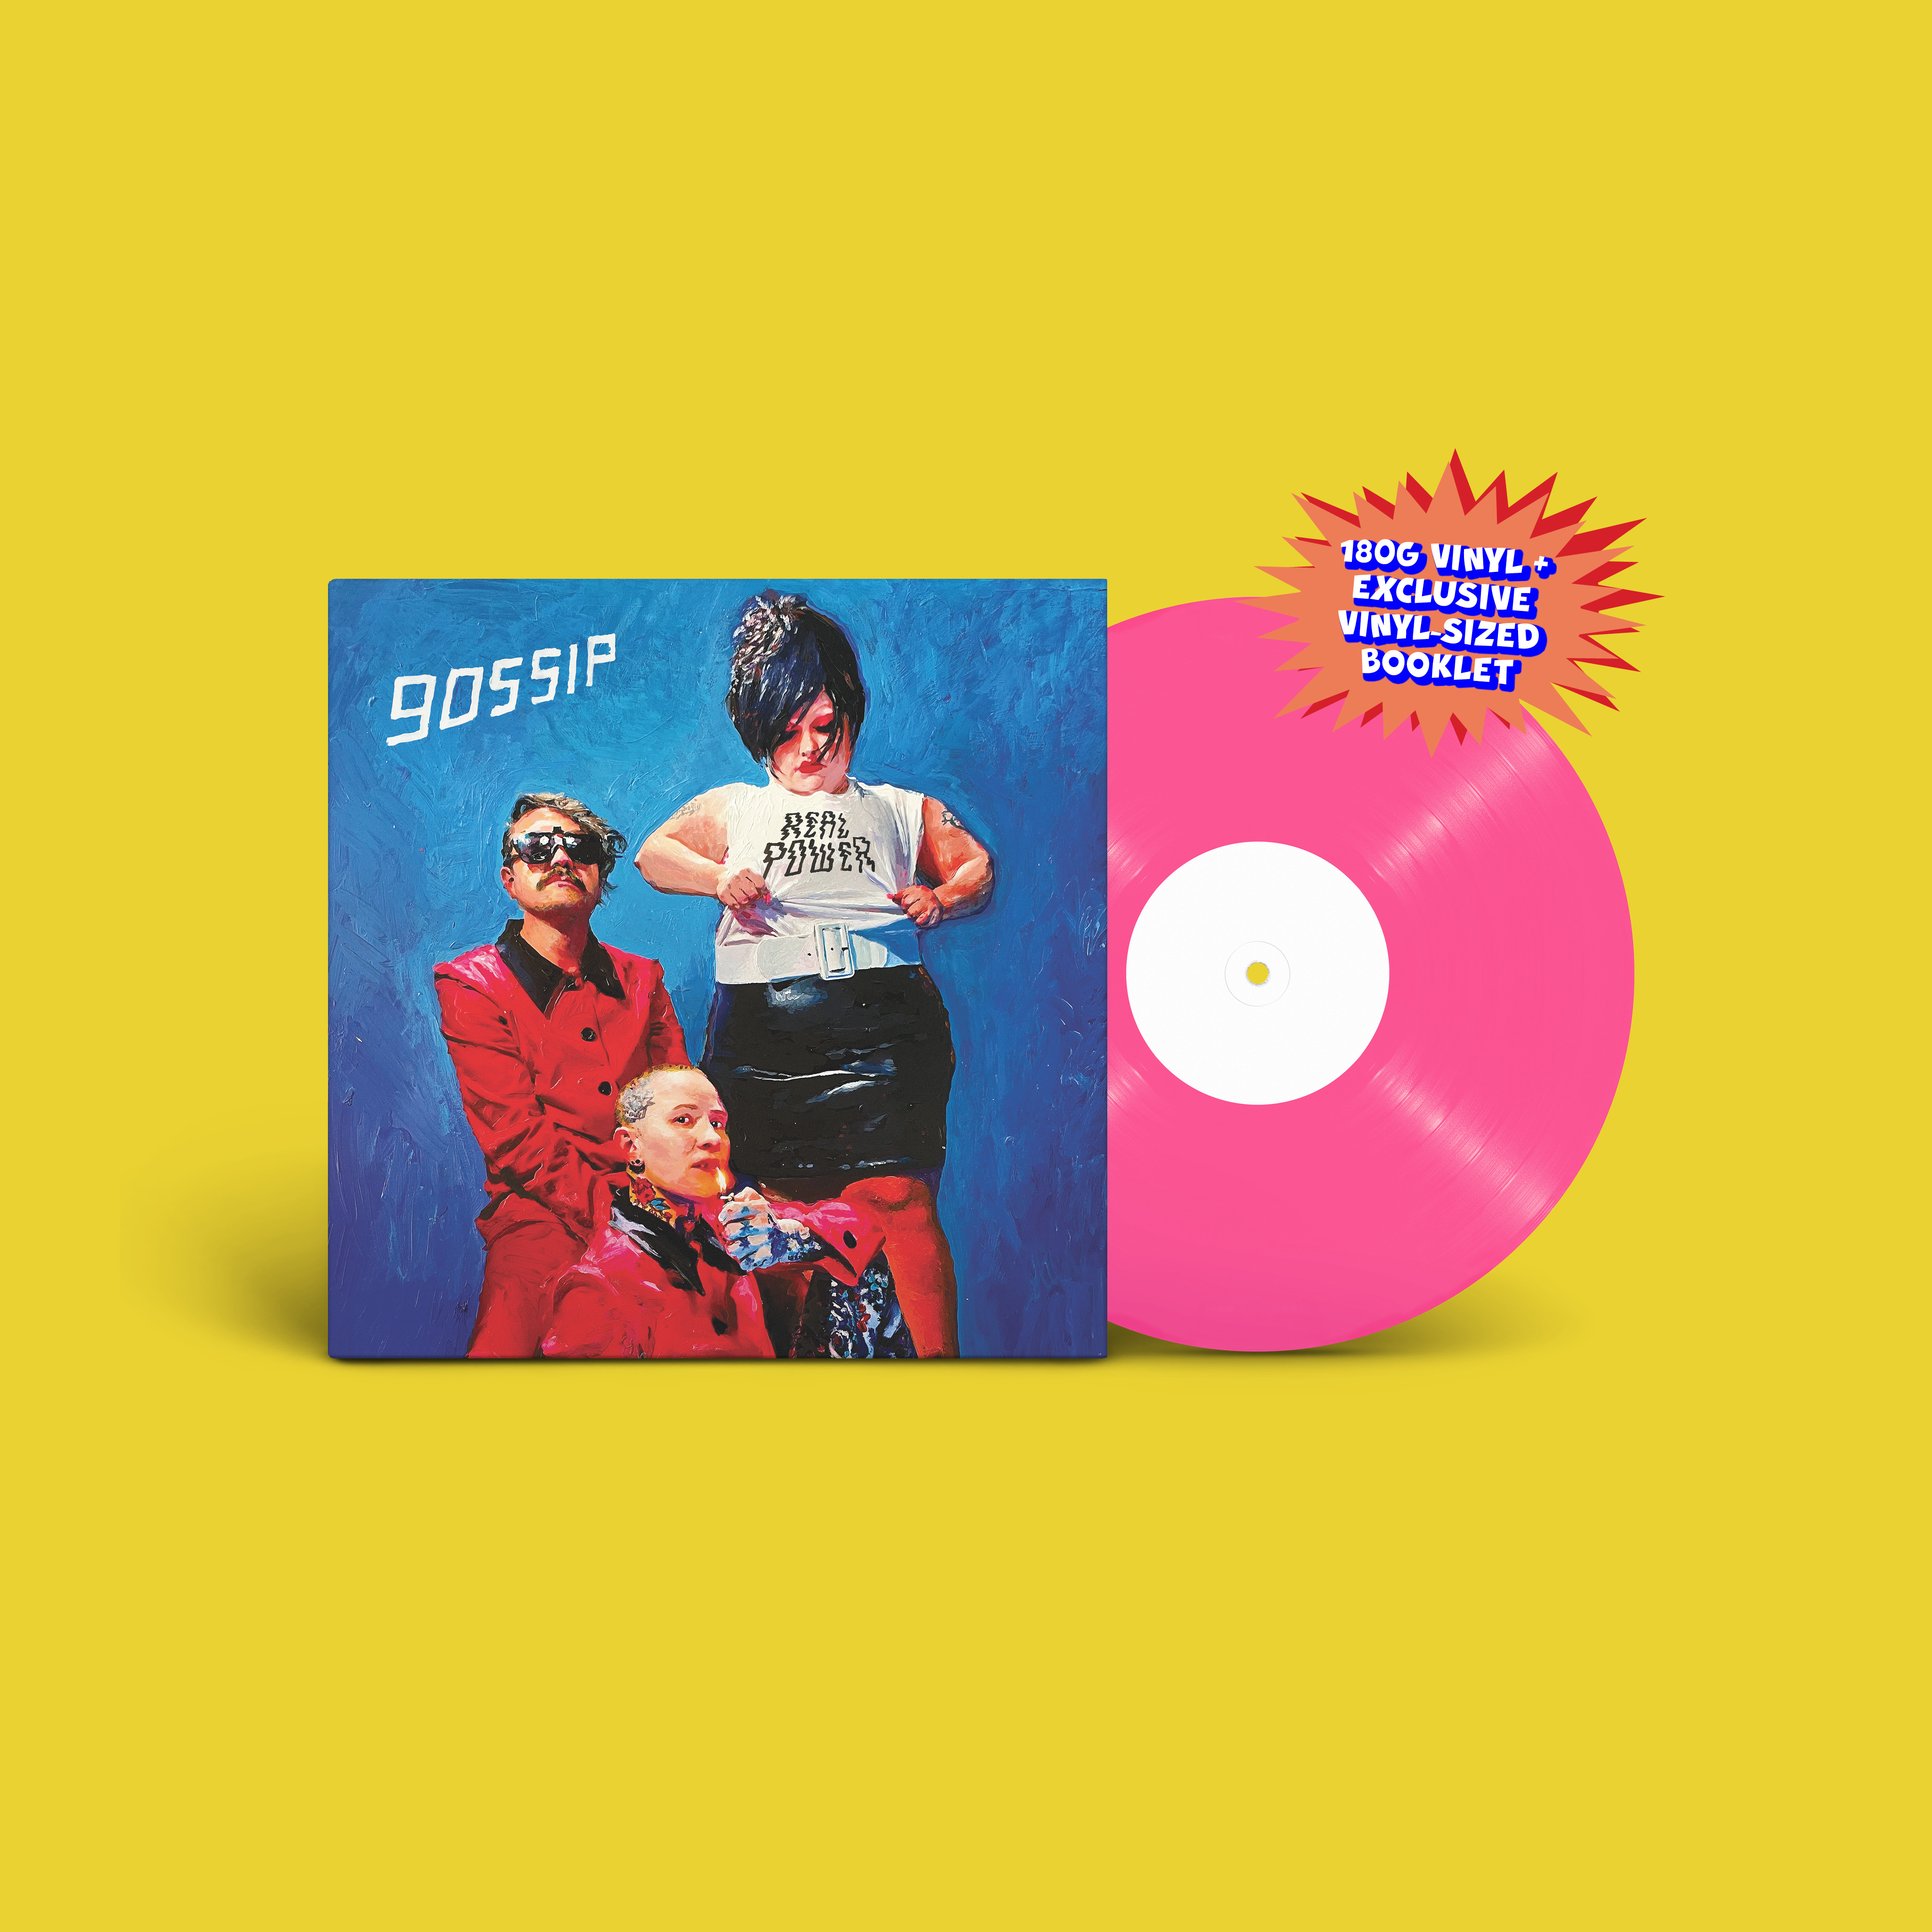 REAL POWER - PINK VINYL EDITION